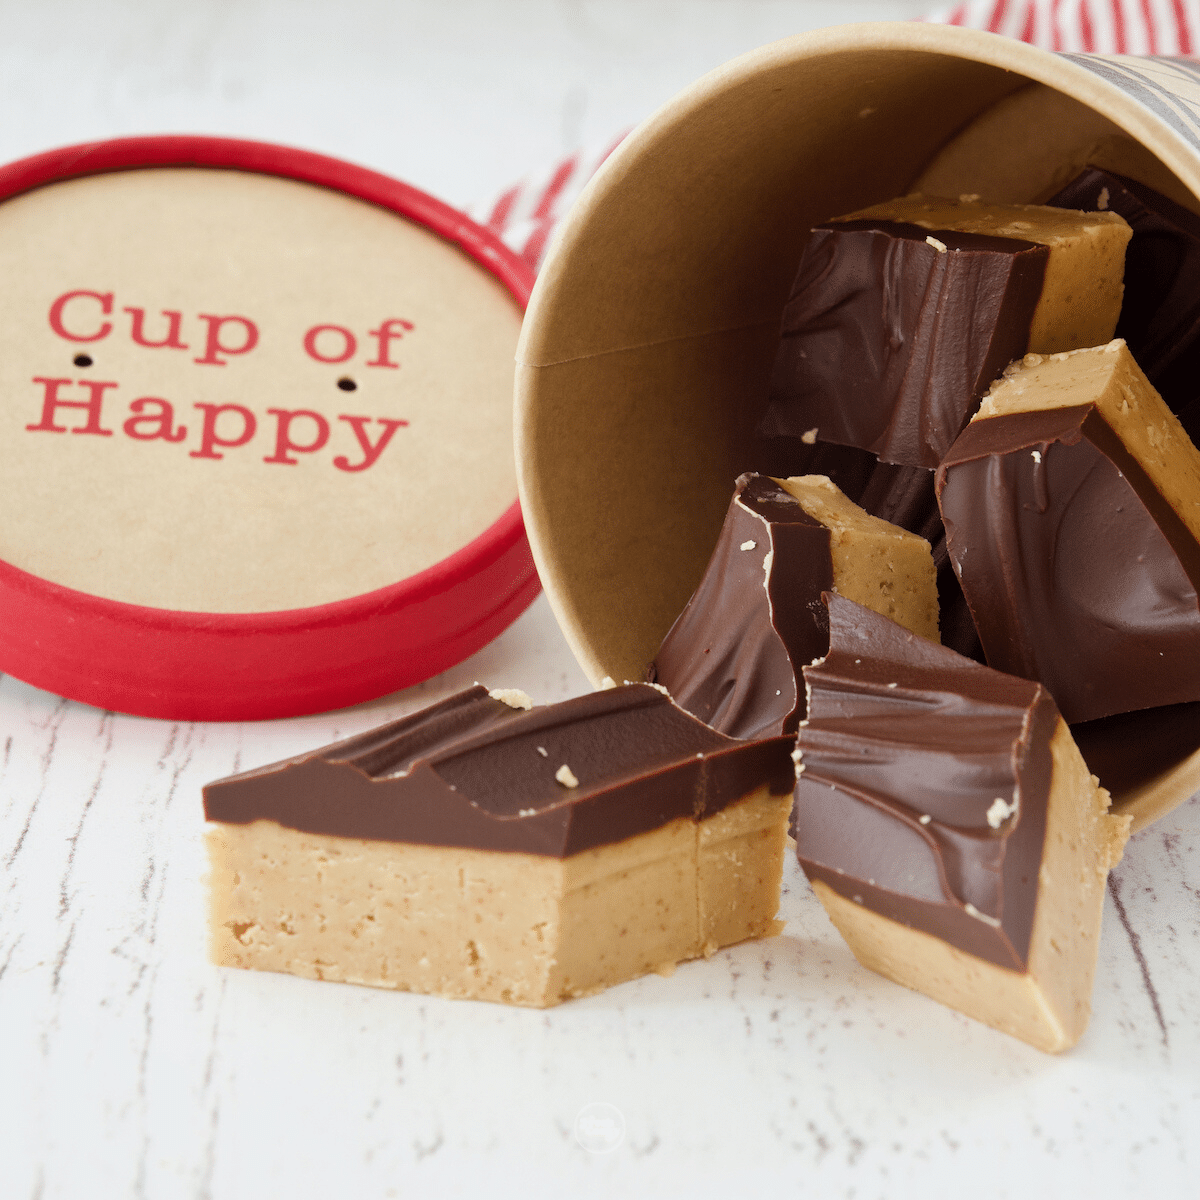 Cut up buckeye bars in a cute snack cup for gifting.